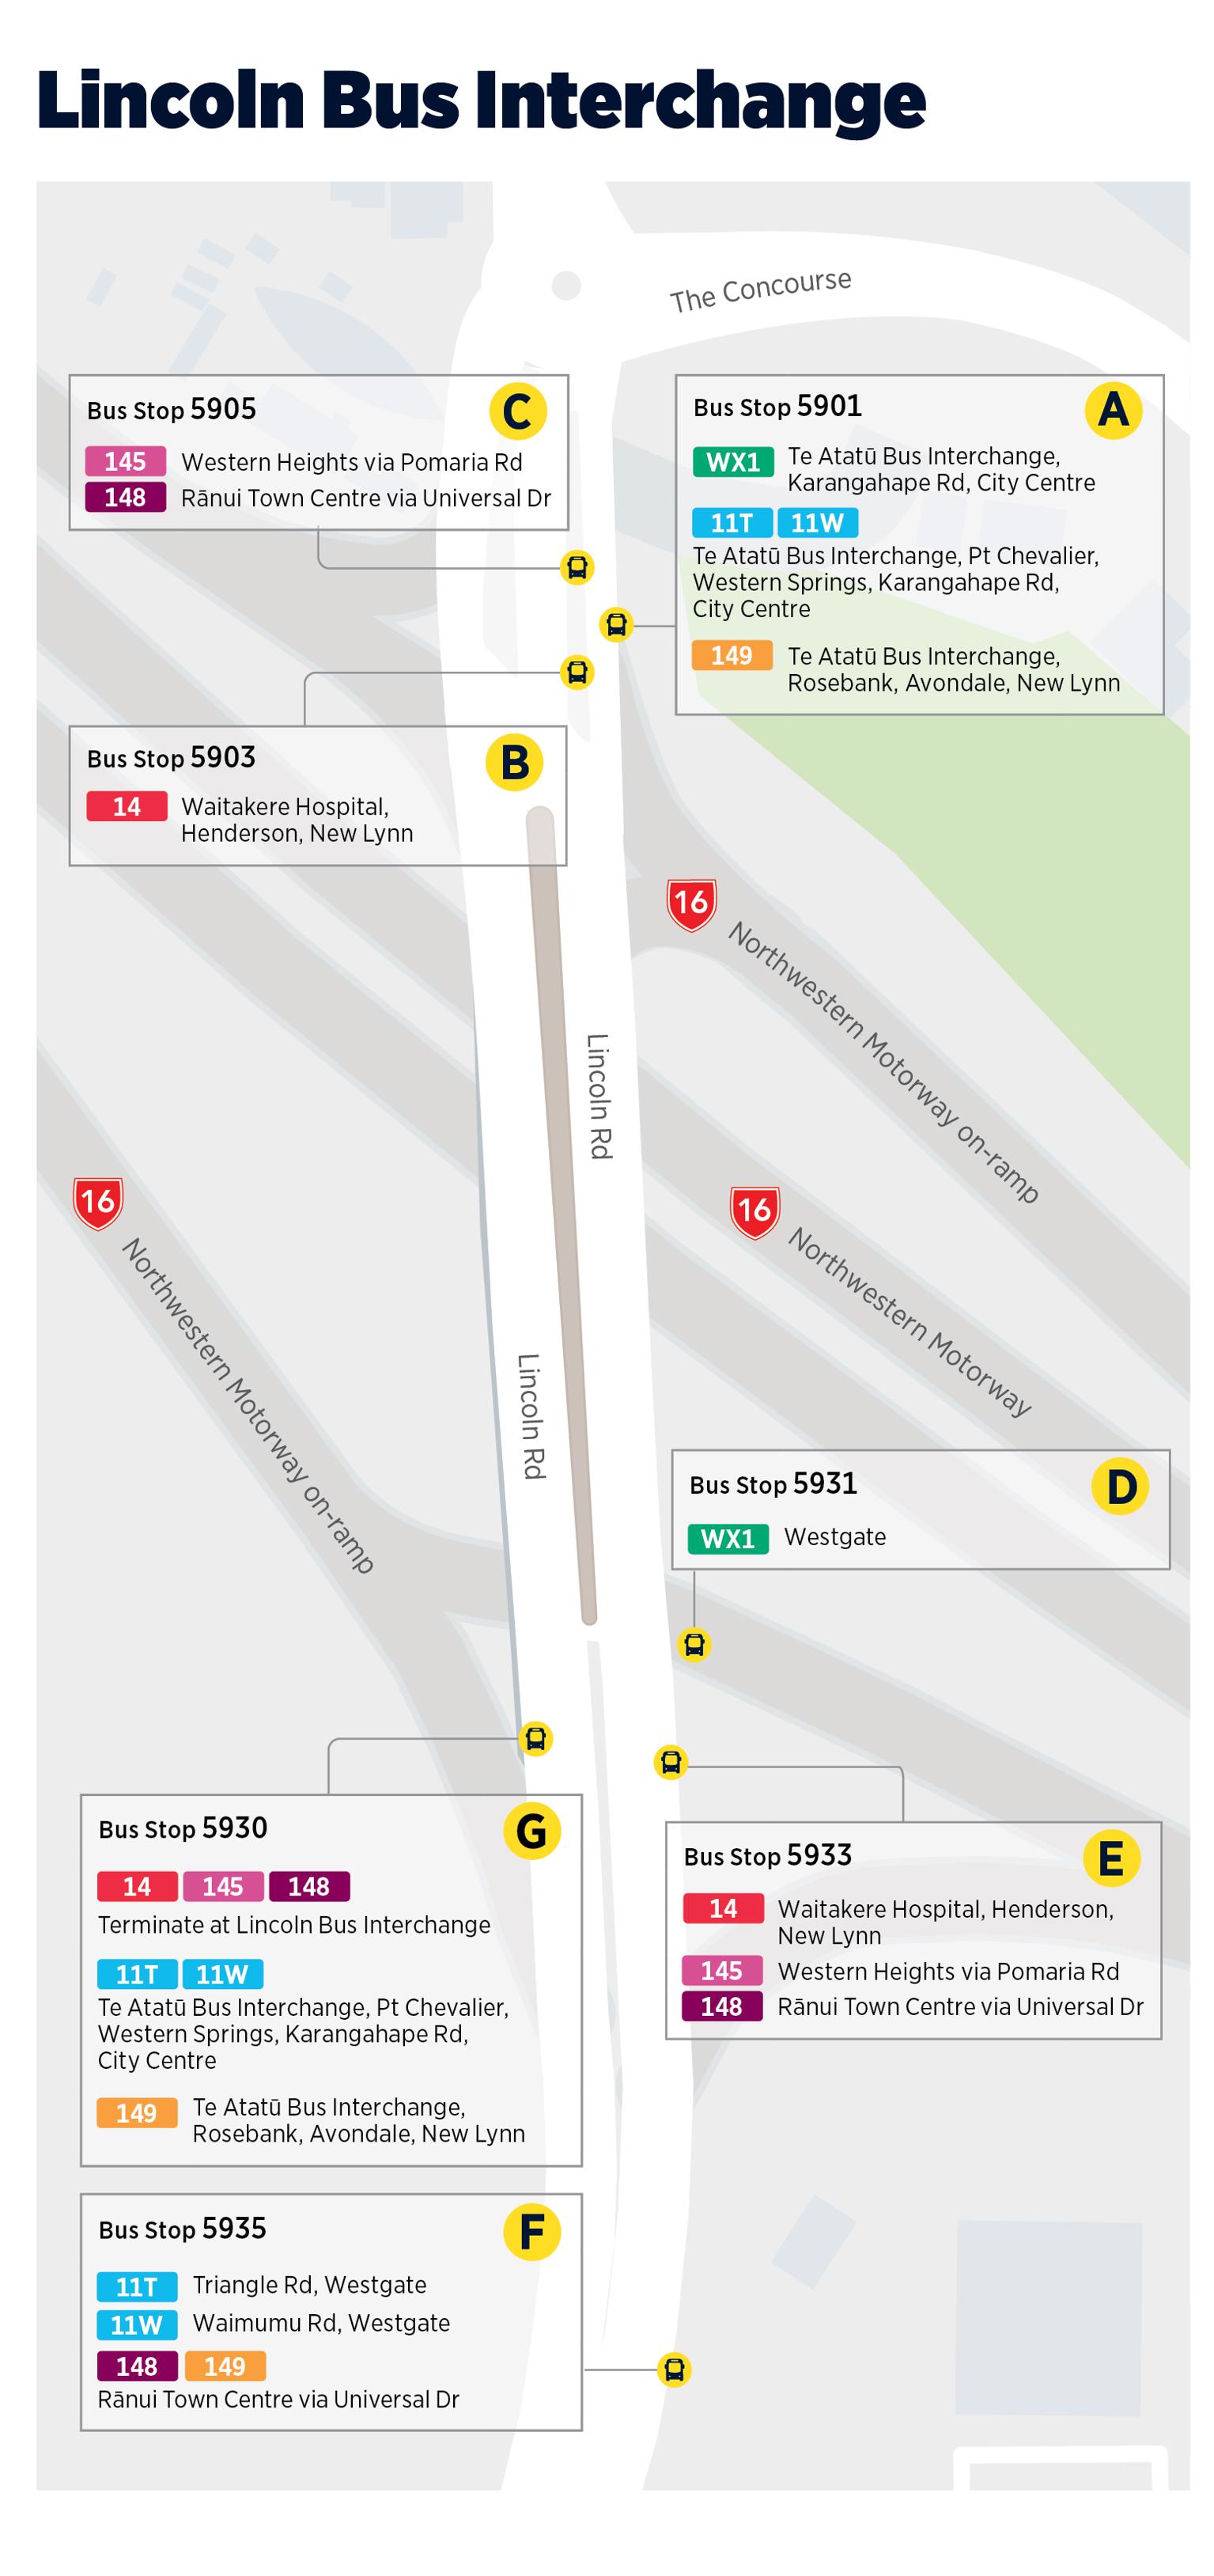 Image showing map of bus stops 5901, 5903, 5905, 5931, 5933, 5935, and 5930 on the Lincoln bus interchange